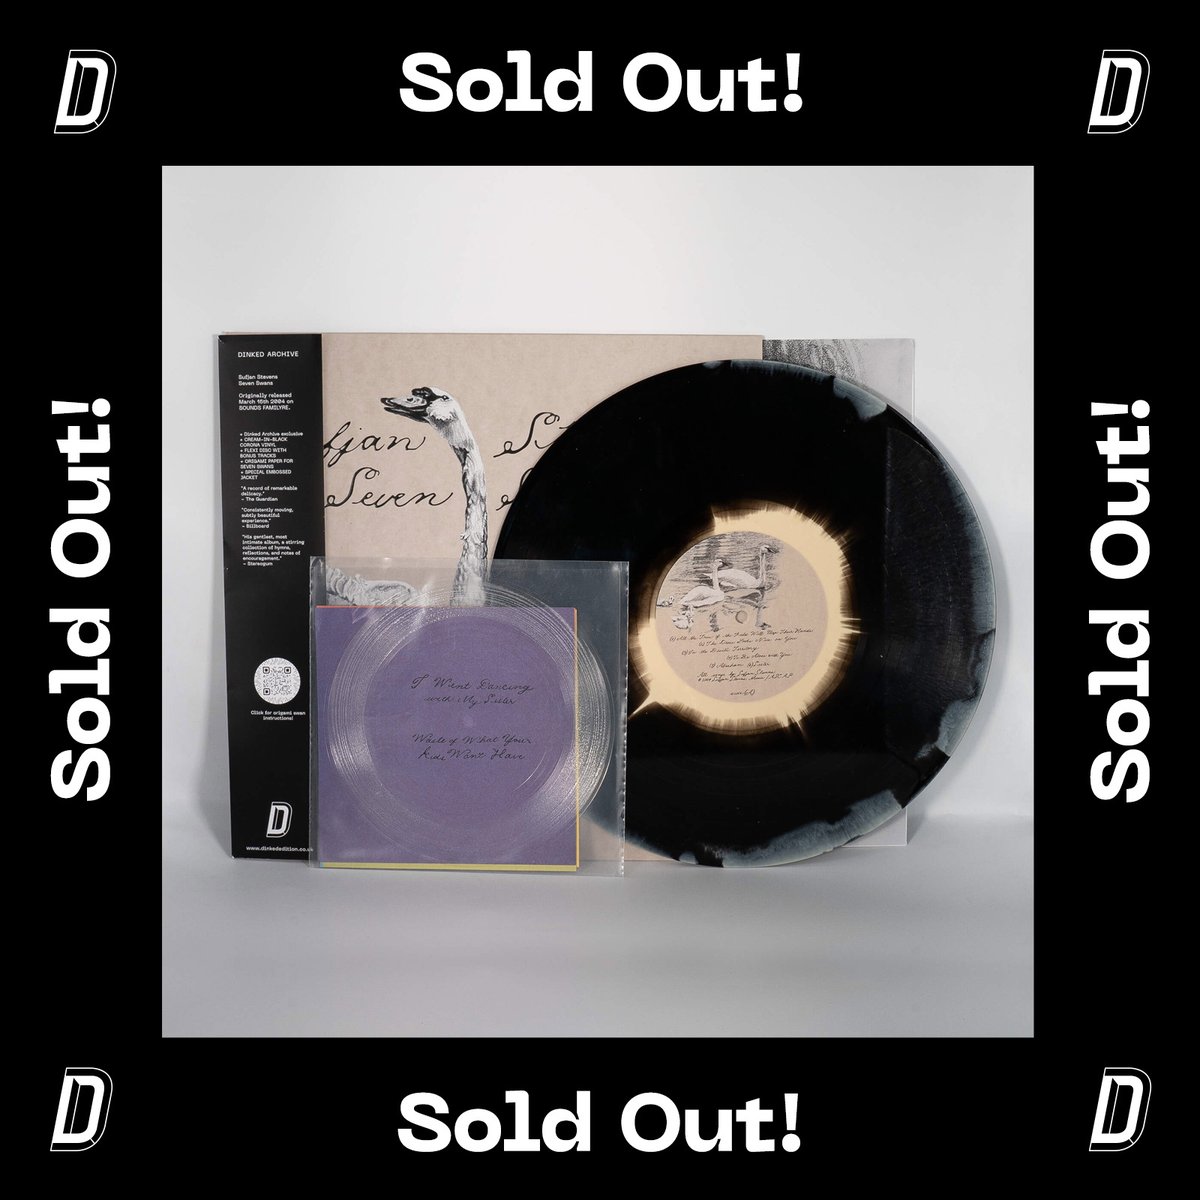 It will hardly surprise you at all to learn that we *think* that was our fastest ever sell out!

Thanks to Sufjan and @asthmatickitty for making such a killer package, and thanks to all of you that shopped so hard and fast. 

Do join the mailing list of all #dinkededition shops,